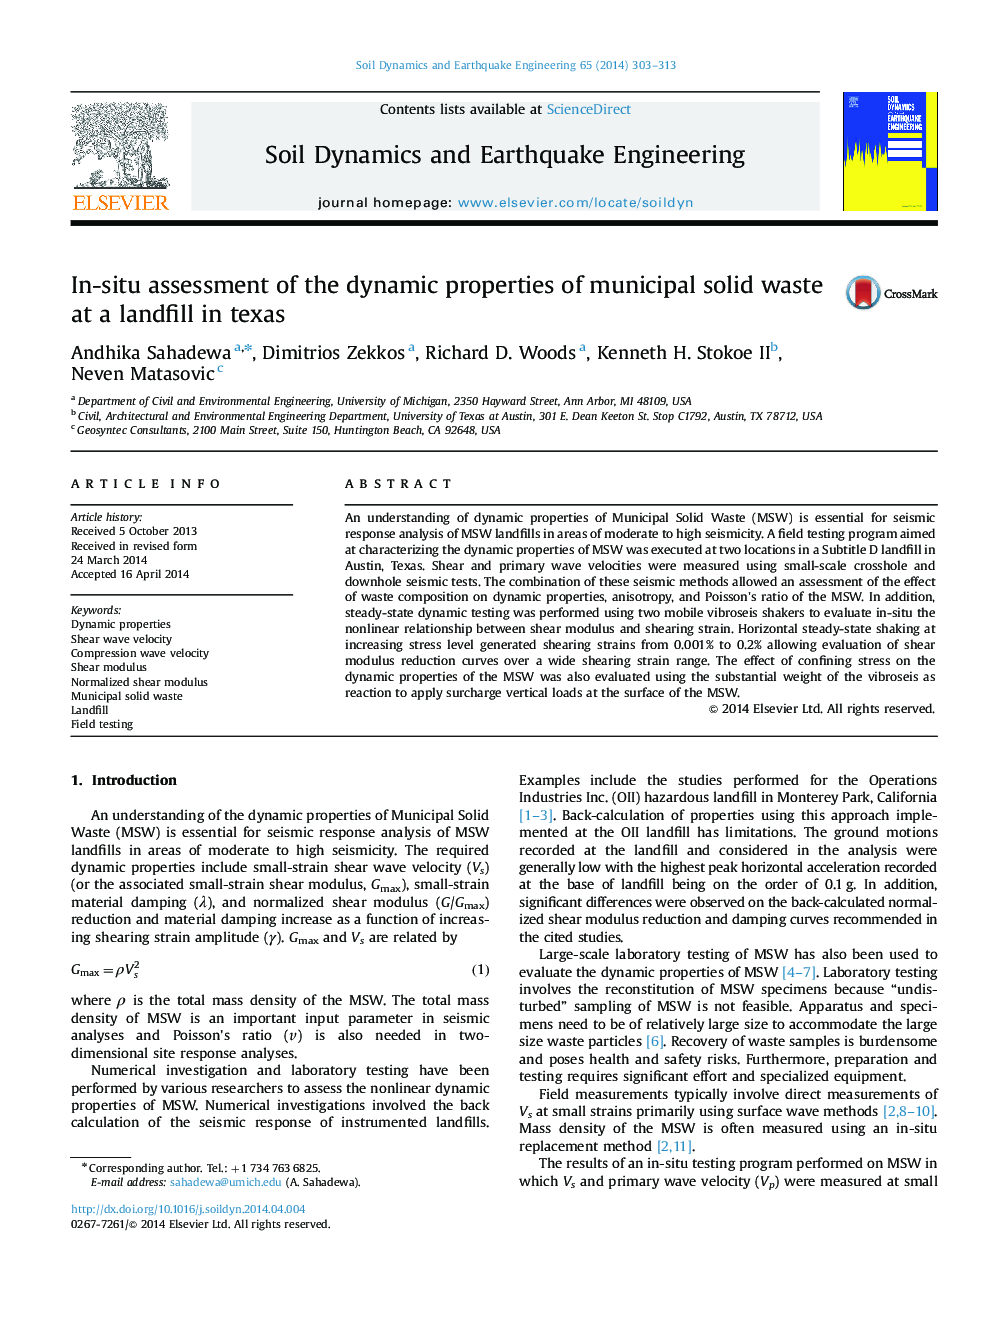 In-situ assessment of the dynamic properties of municipal solid waste at a landfill in texas